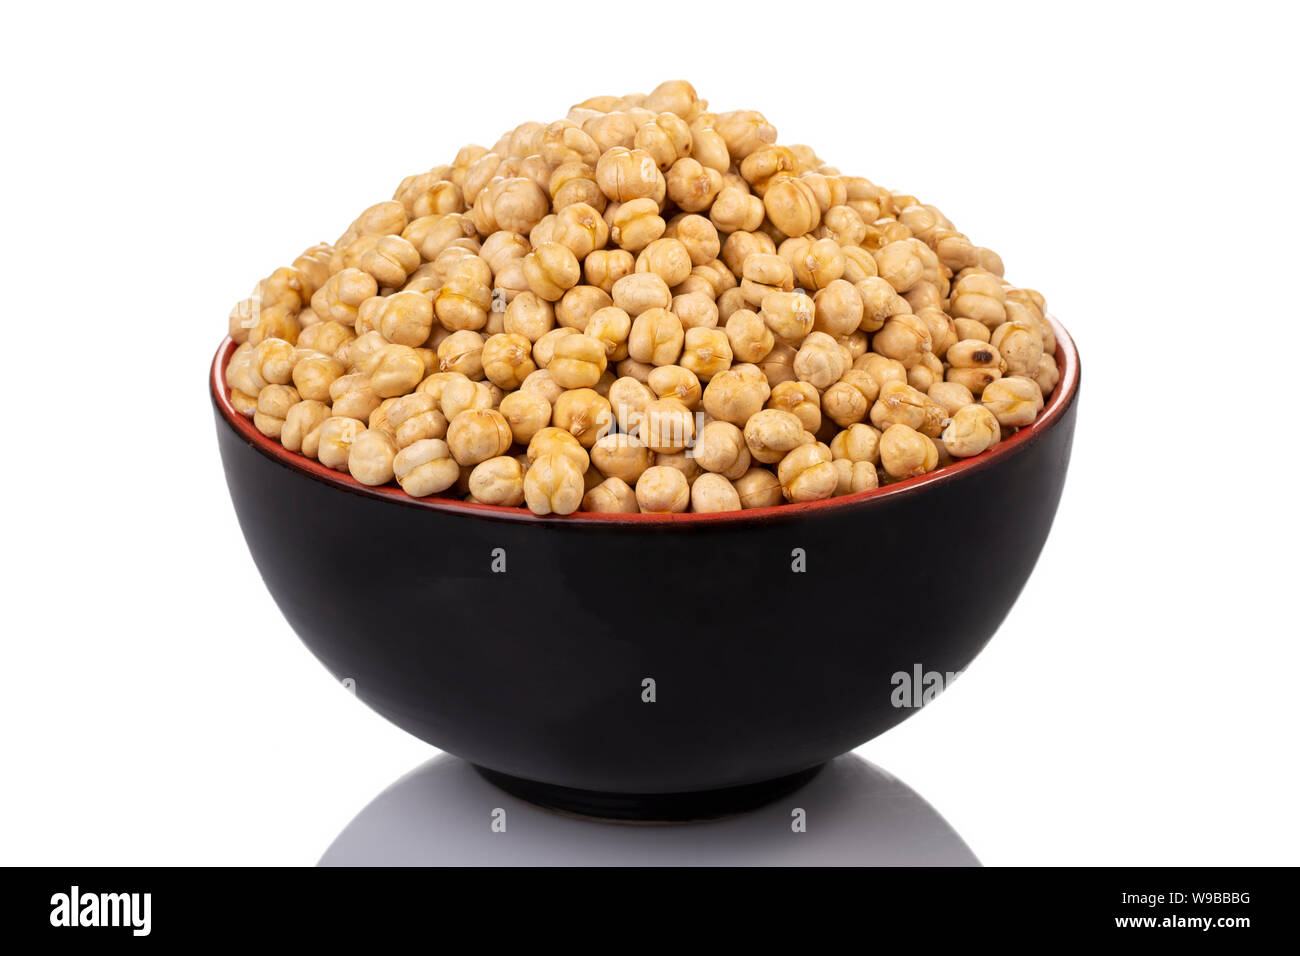 cheakpeas on a black bowl in a white background Stock Photo